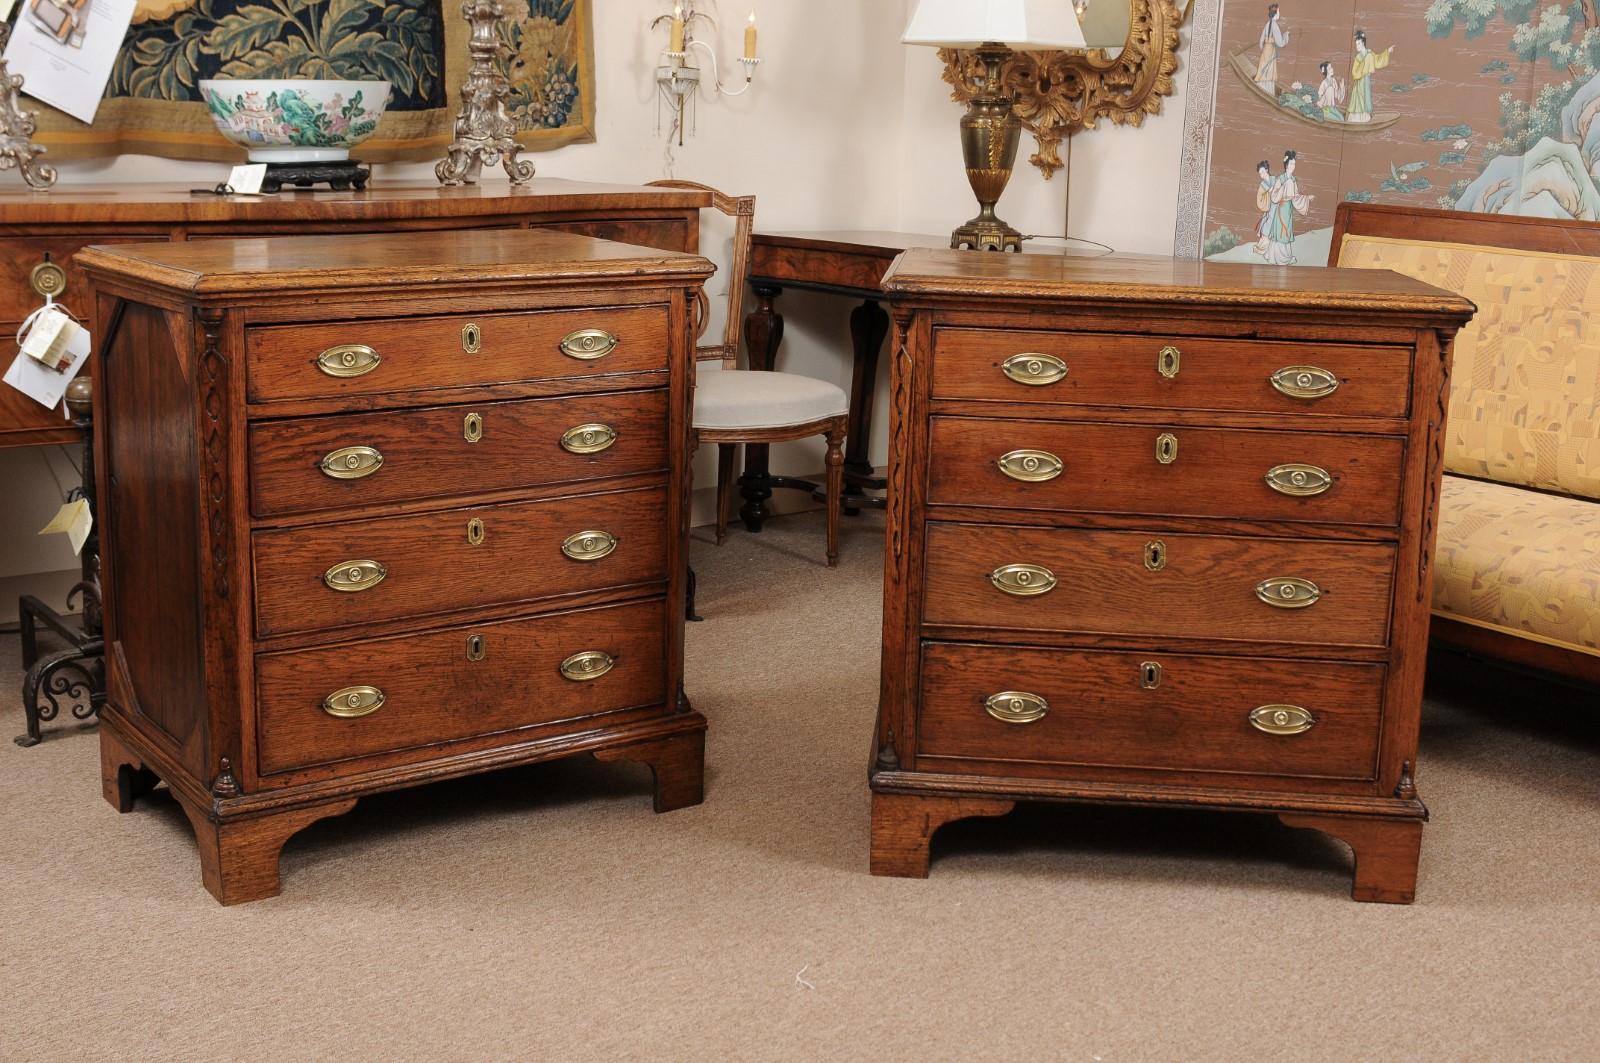 A pair of late 18th century Dutch commodes with canted carved corners, 4 graduating drawers with brass pulls ending in bracket feet.

   